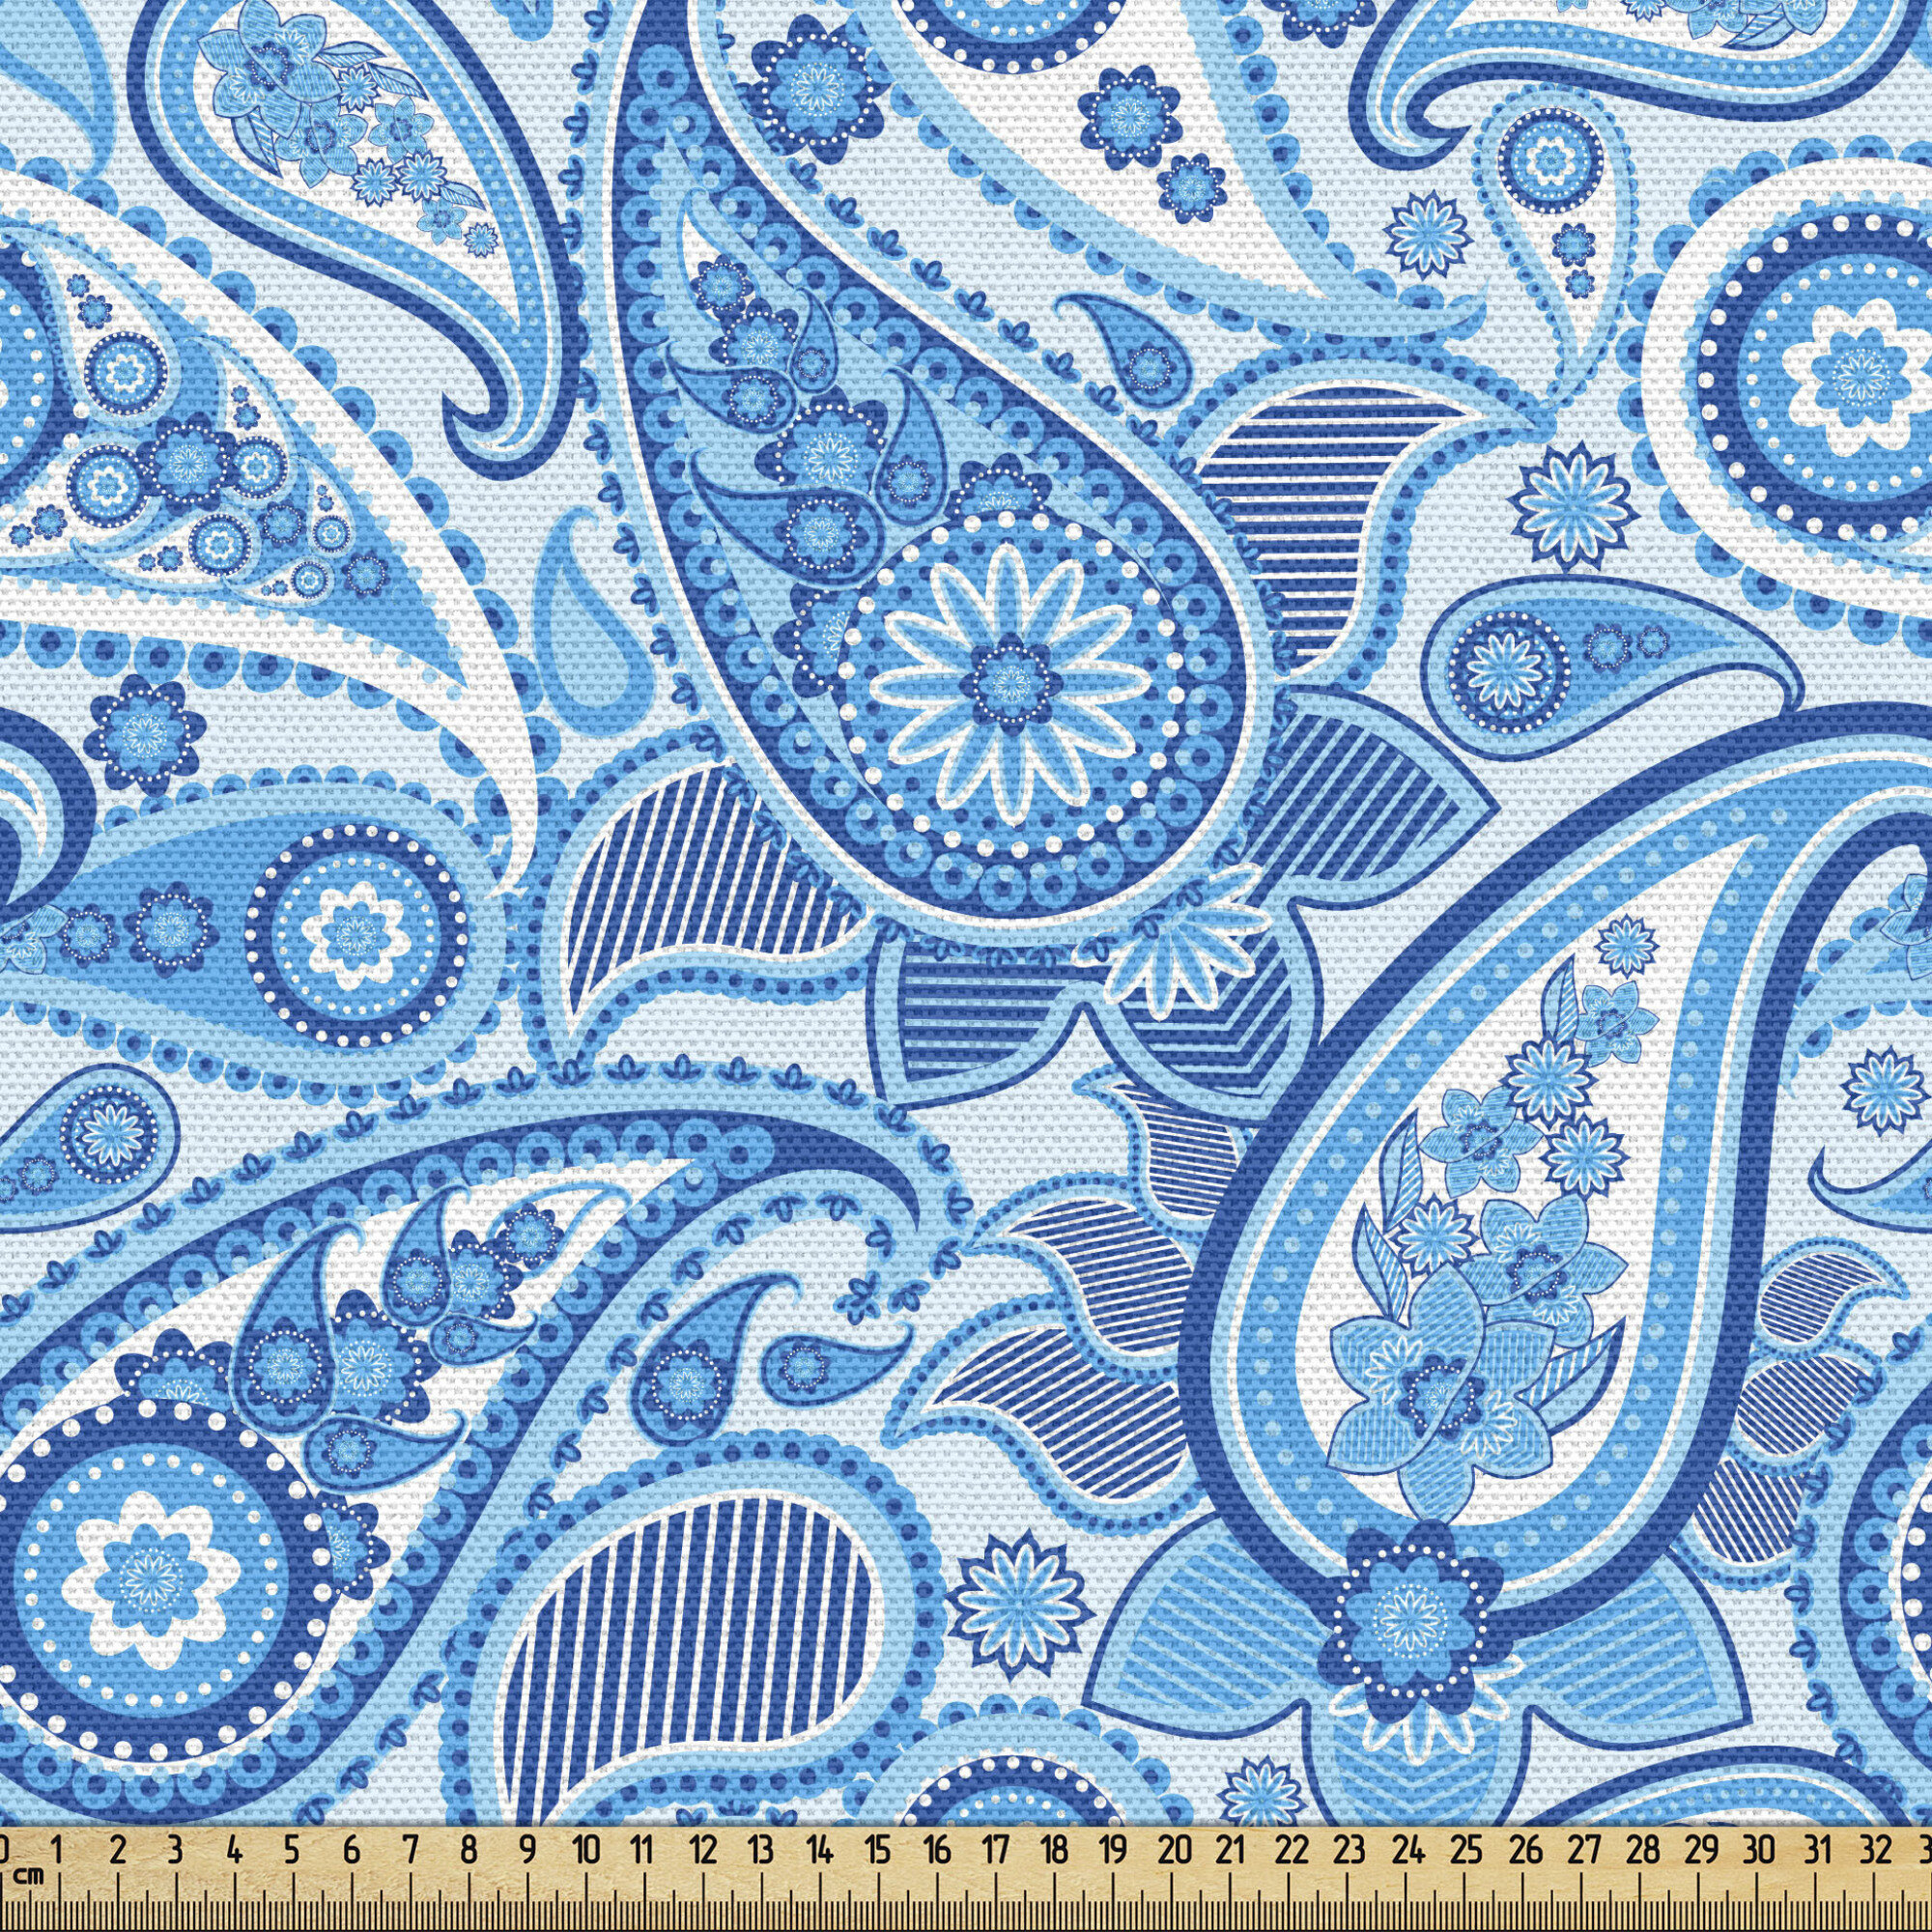 fab_161844_Ambesonne Blue Paisley Fabric By The Yard, Rhythmic Buta  Elements With Floral Ornaments Illustration Print, Decorative Fabric For 